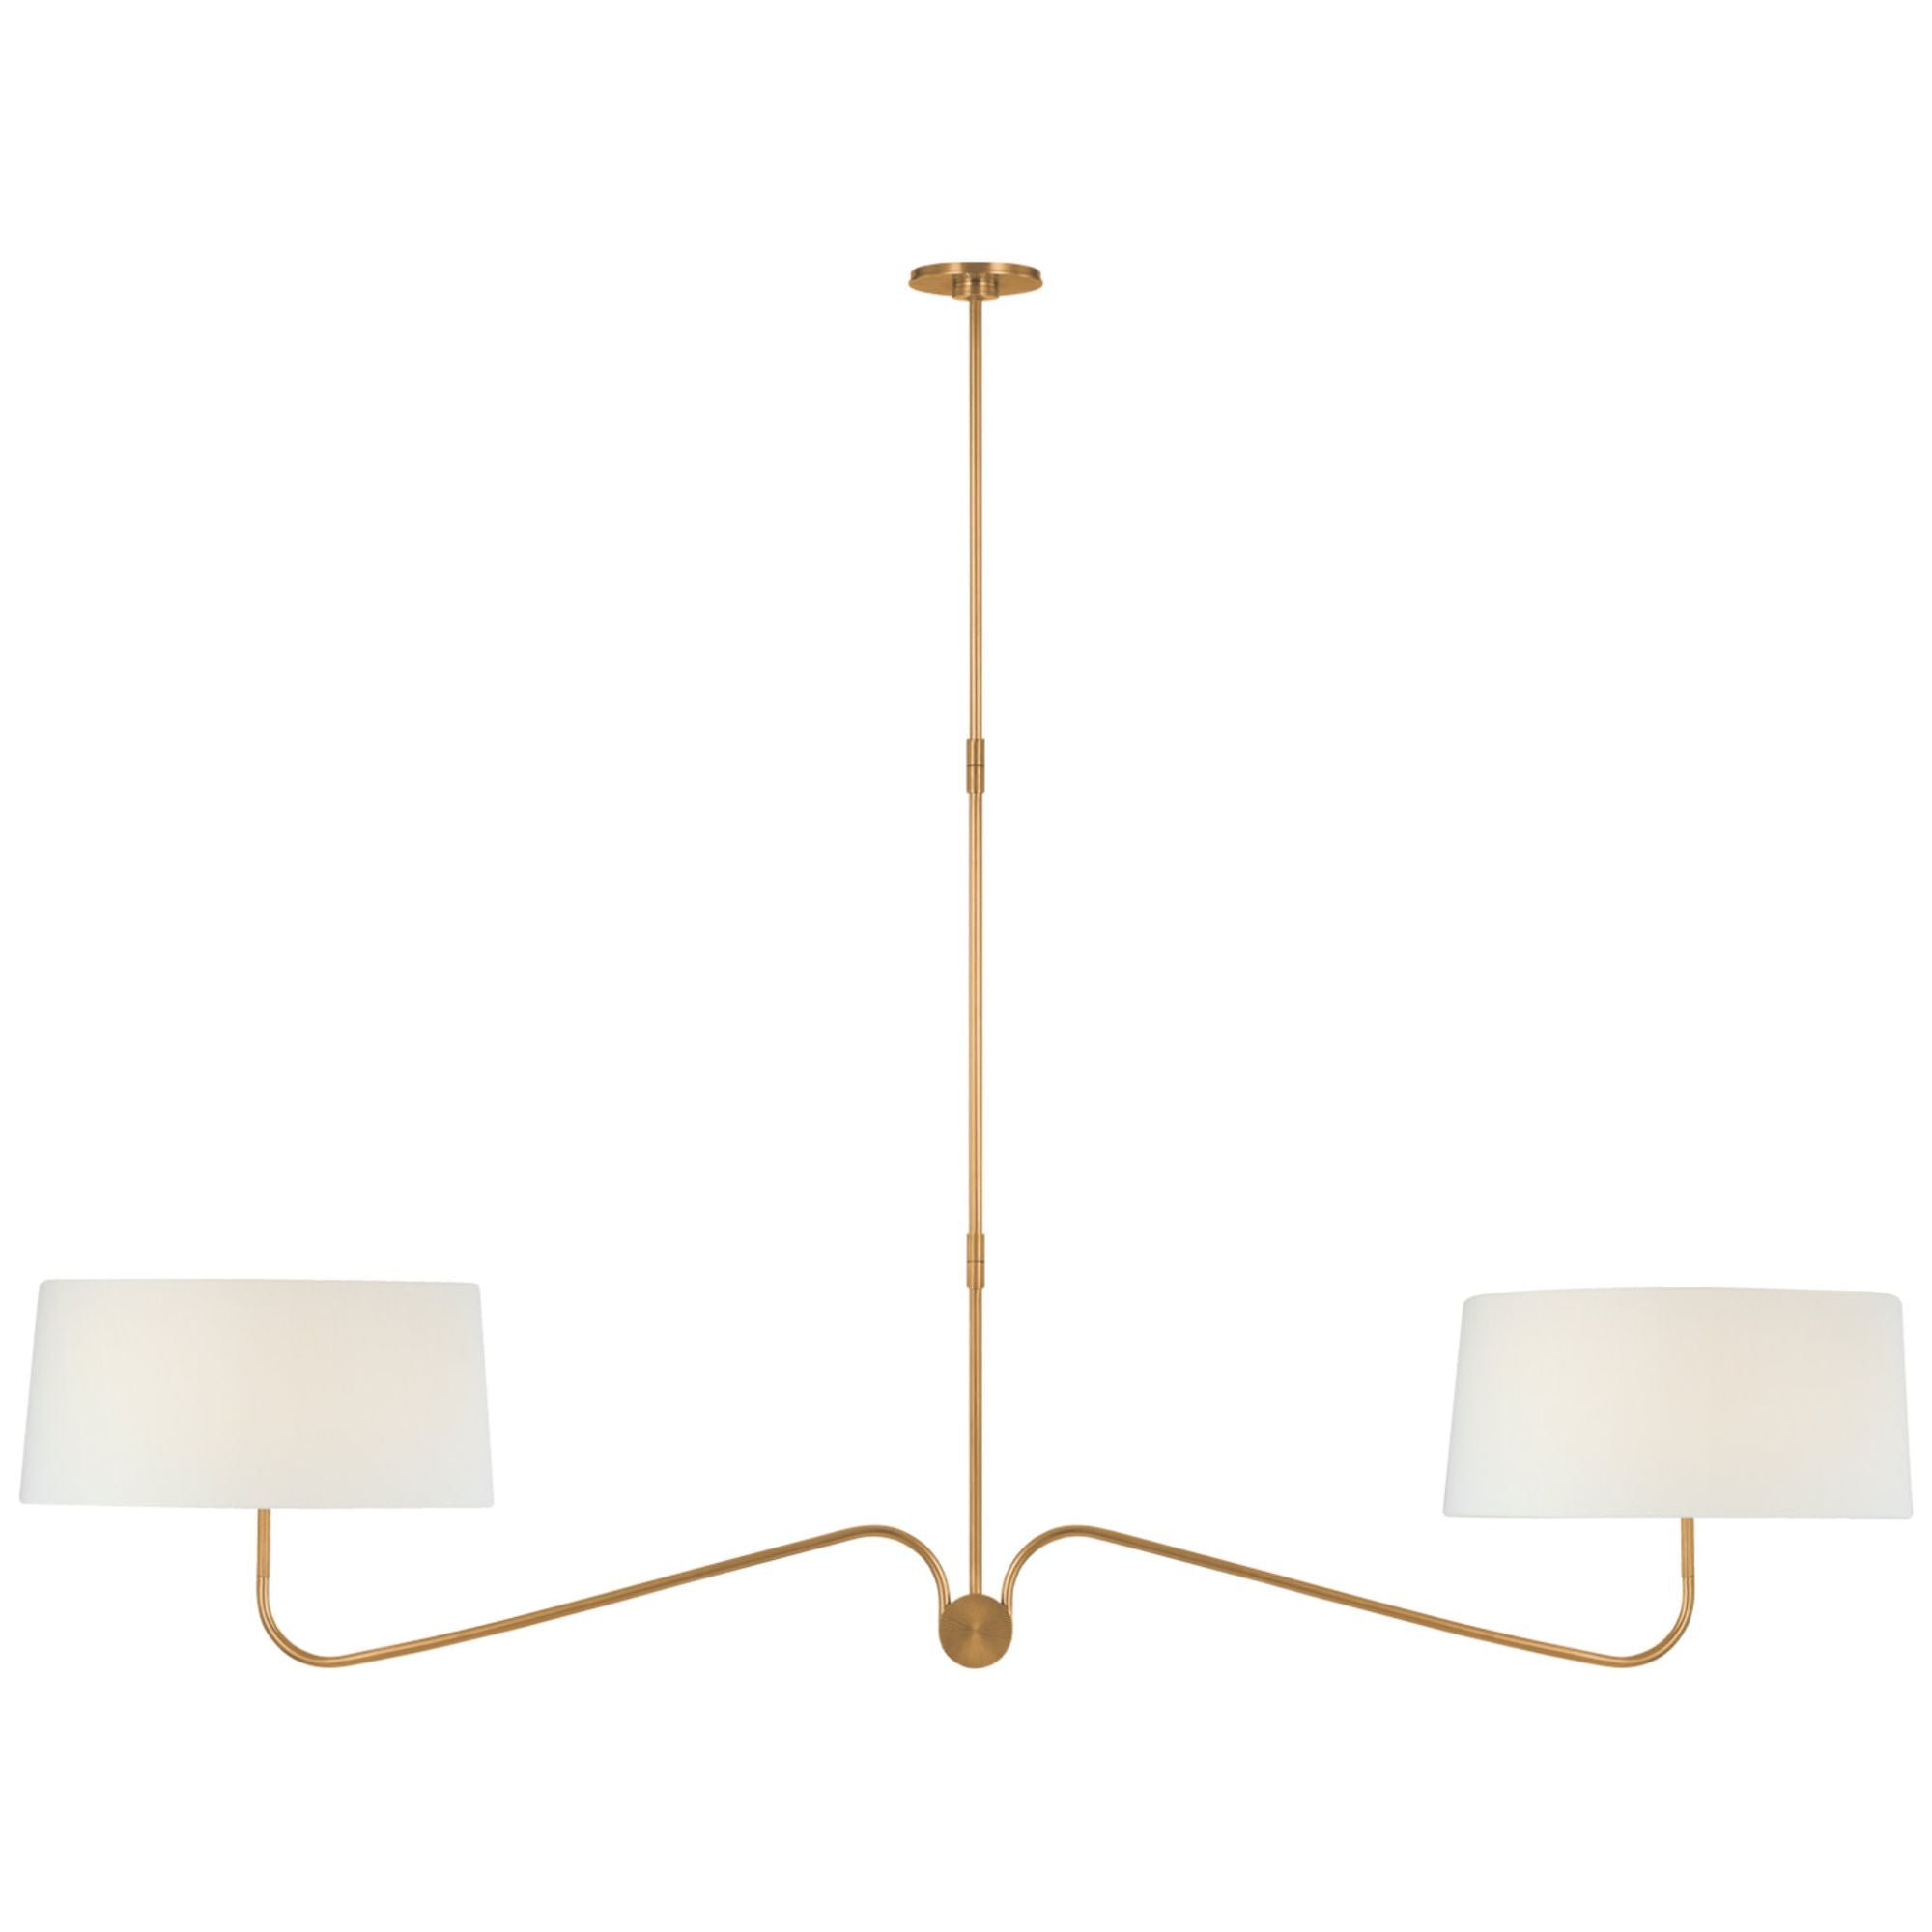 Thomas O'Brien Canto 68" Linear Chandelier in Hand-Rubbed Antique Brass with Linen Shades